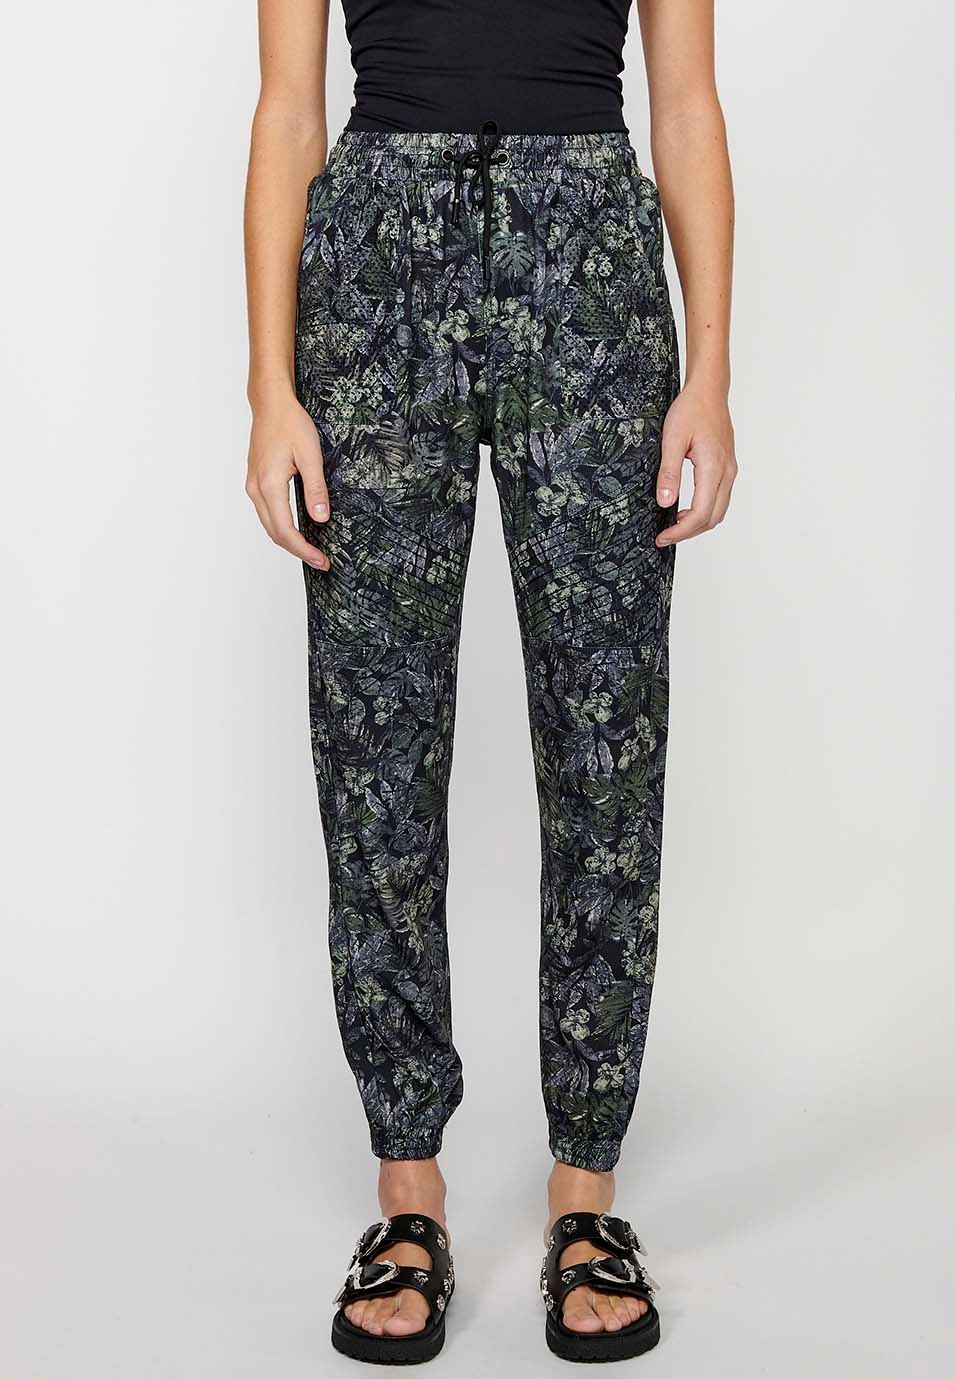 Long jogging pants fitted at the ankles with elasticated waistband with drawstring and Khaki floral print for Women 4